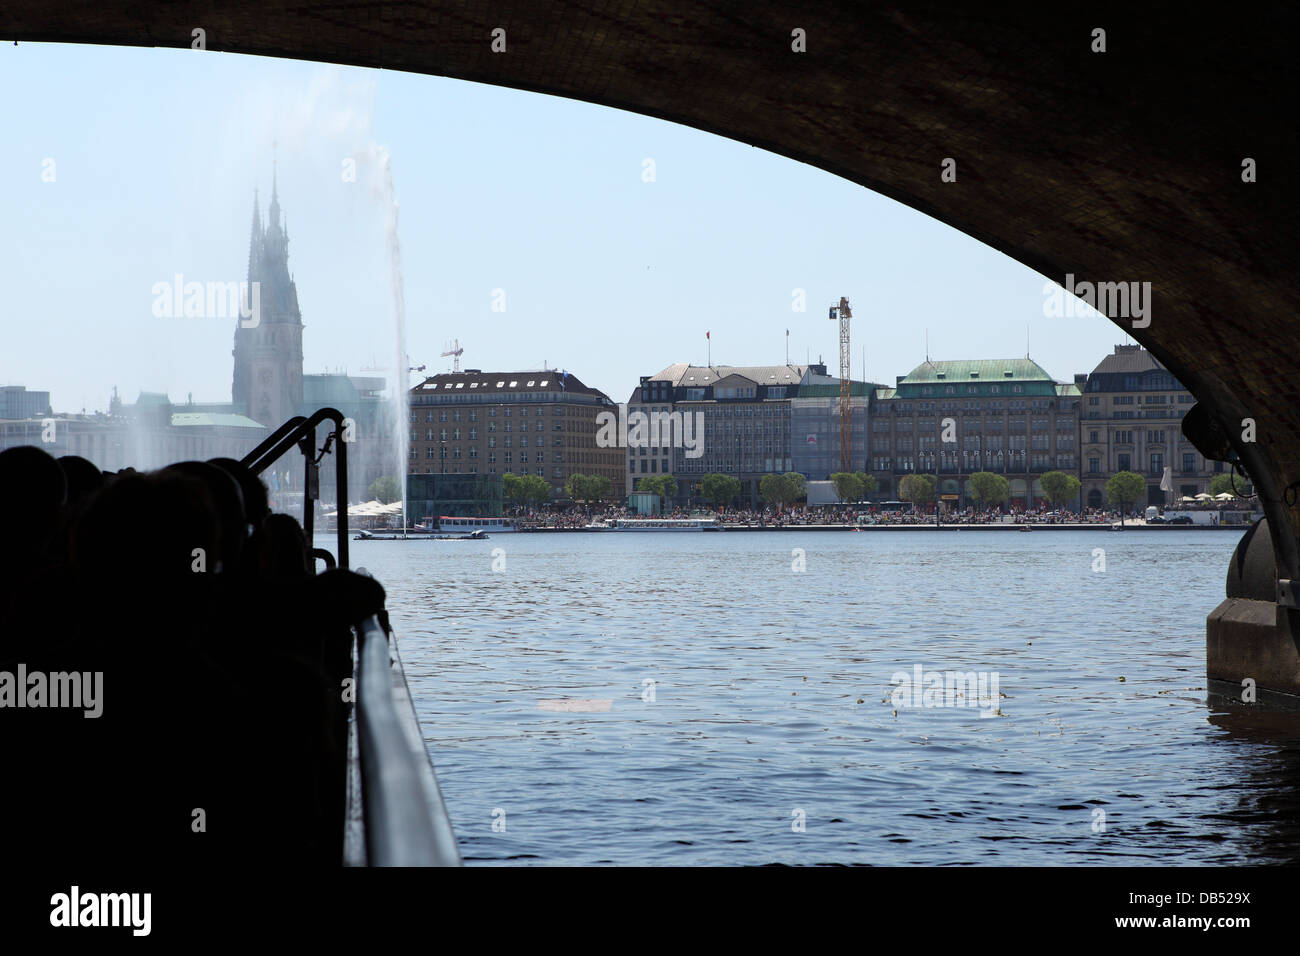 A boat cruises under a bribge and onto the Inner Alster lake (Innenalster) in Hamburg, Germany. Stock Photo